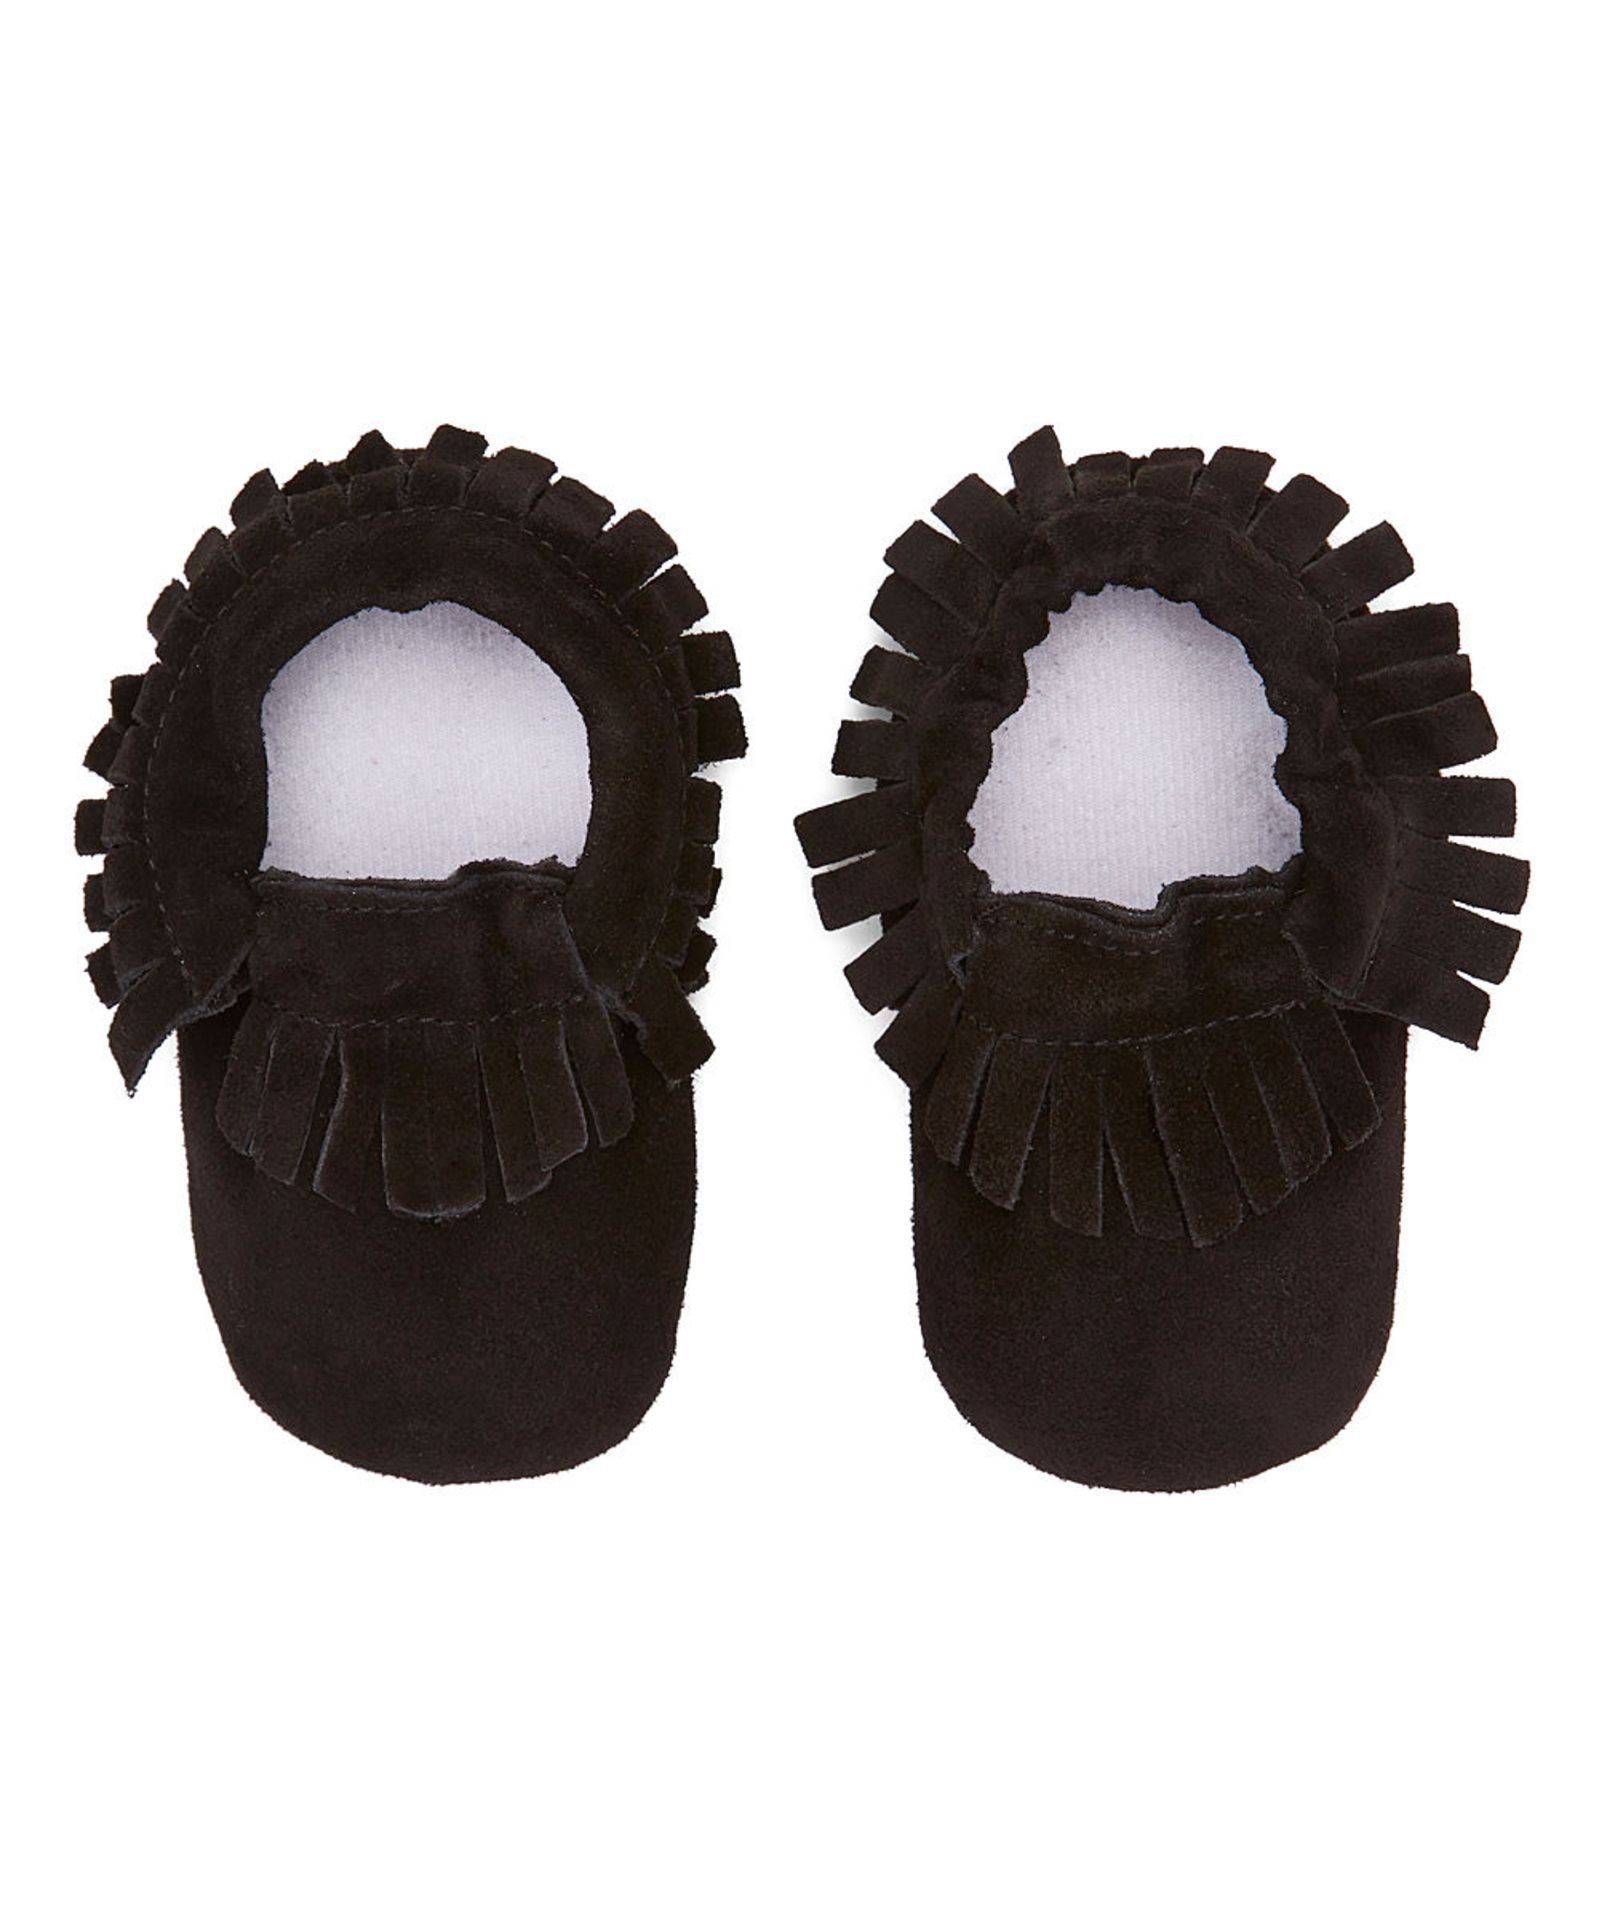 Just Couture, Boys Black Suede Fringe Moccasins, XL (New with box) [Ref: 34423544- S]